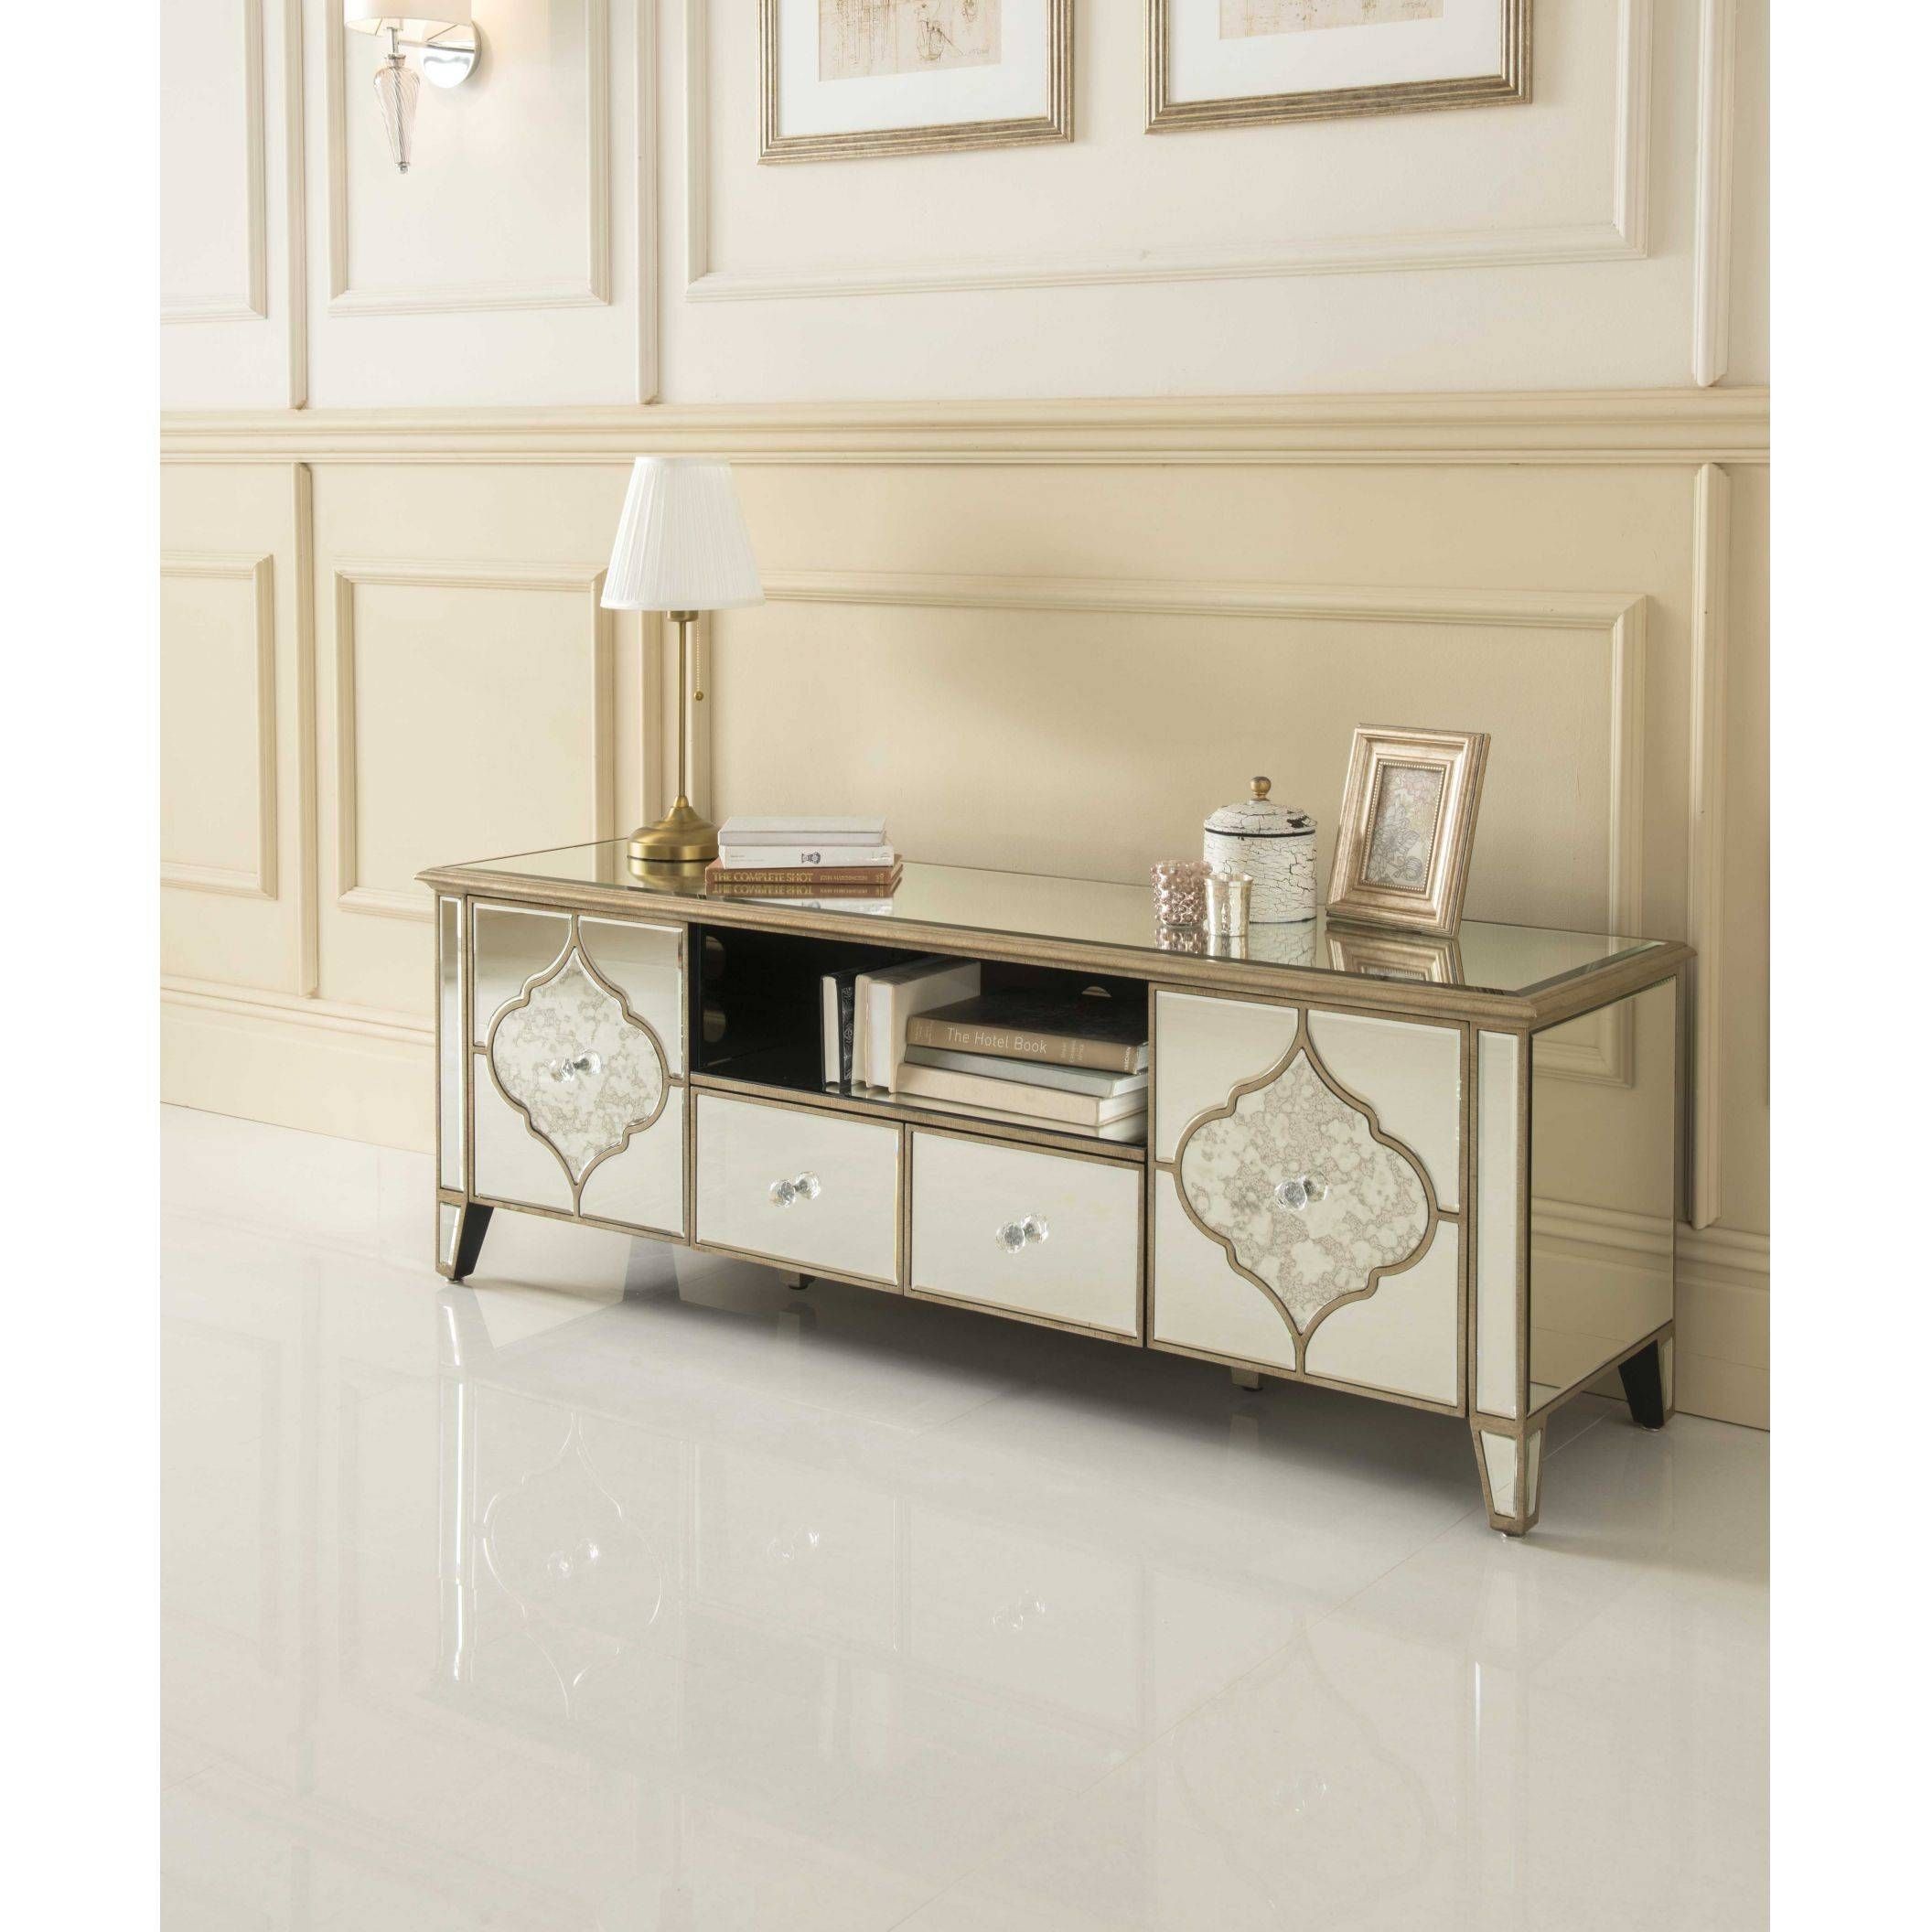 Sassari Mirrored Tv Cabinet | Glass Furniture With Regard To Mirrored Tv Stands (View 3 of 15)